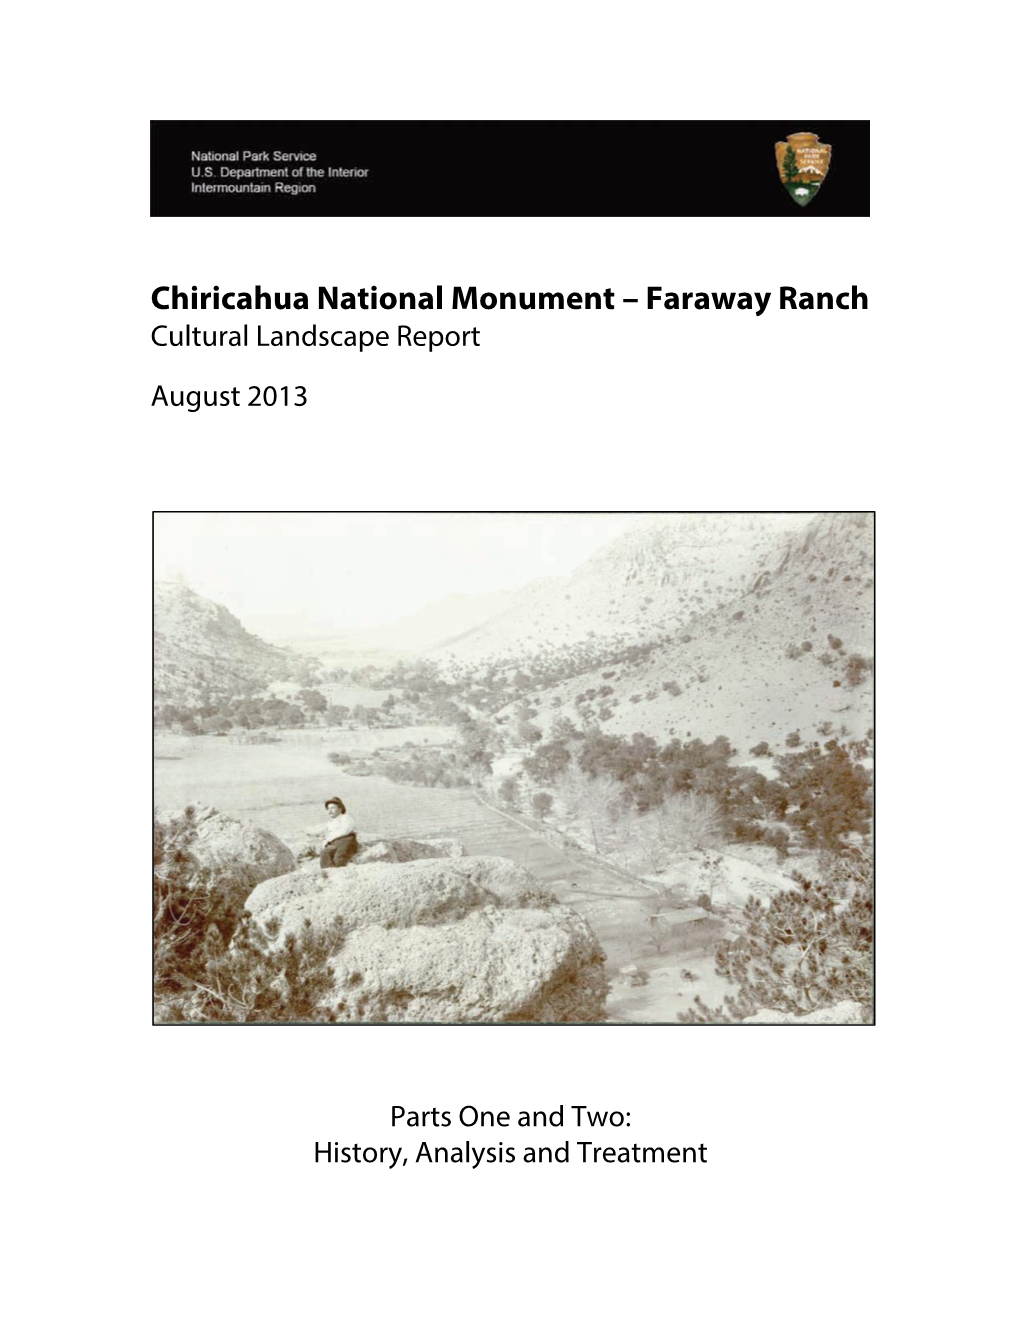 Chiricahua National Monument – Faraway Ranch Cultural Landscape Report August 2013